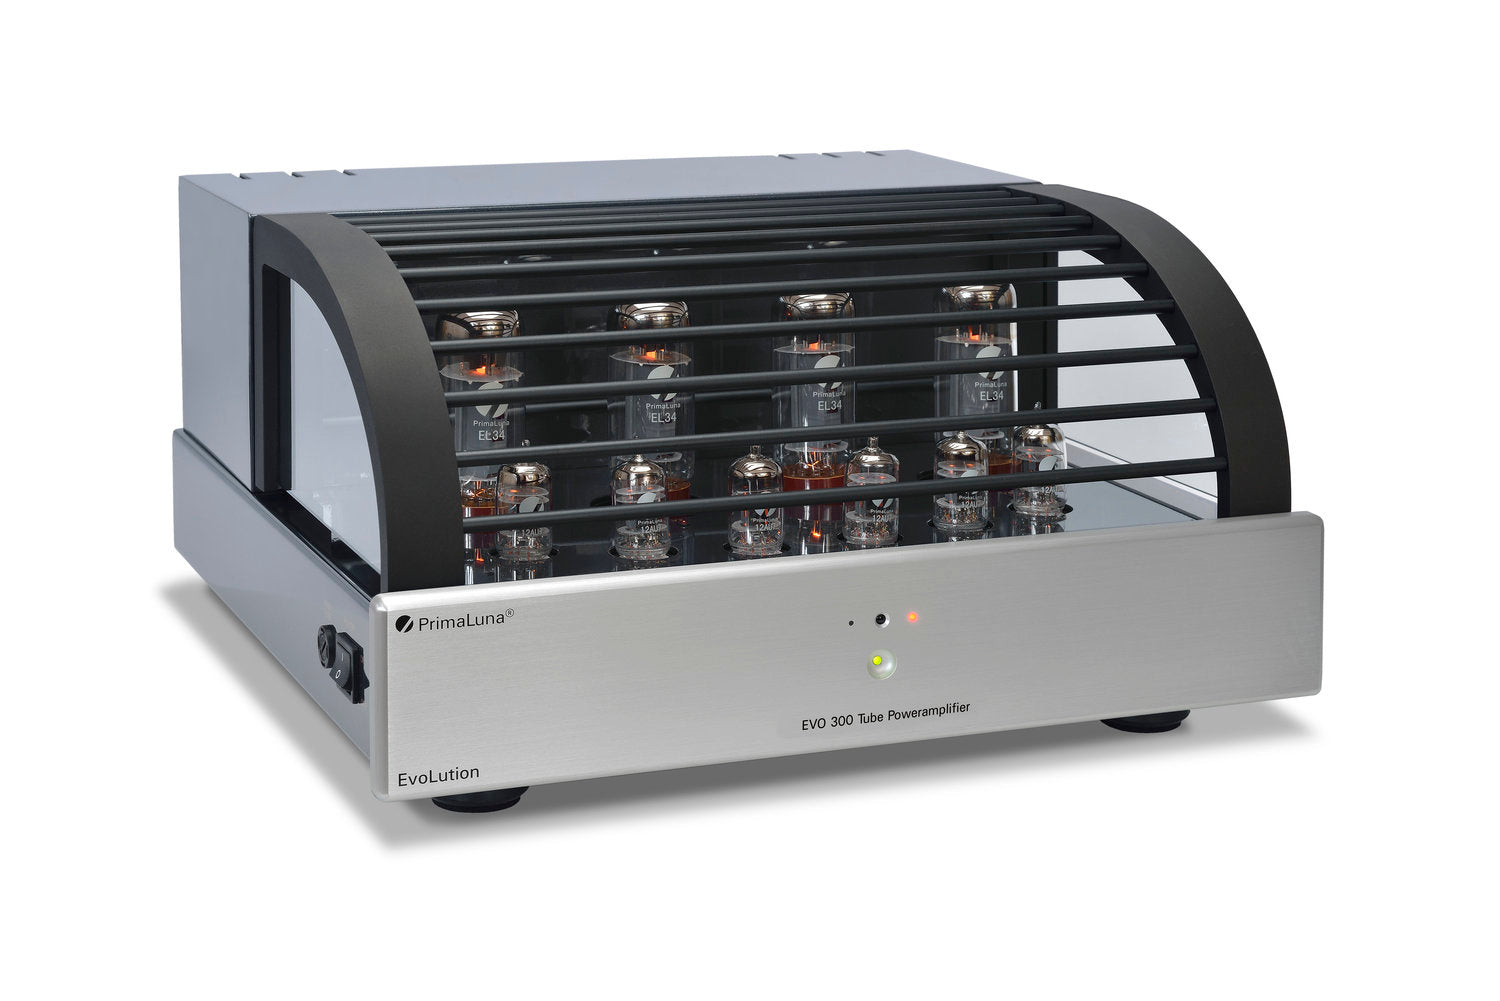 PRIMALUNA EVO 300 TUBE POWER AMPLIFIER- Discover the high quality music at a very best price at Vinyl Sound. Check out the Integrated Amplifiers: PrimaLuna EVO 300, Primaluna evo 100, Primaluna evo 200, The Power Amplifiers: Primaluna evo 400, PrimaLuna Evo 30, Primaluna evo 100, The Preamplifiers: Primaluna evo 100, Primaluna evo 300, Tube-Hybrid Integrated, the PrimaLuna transformers...